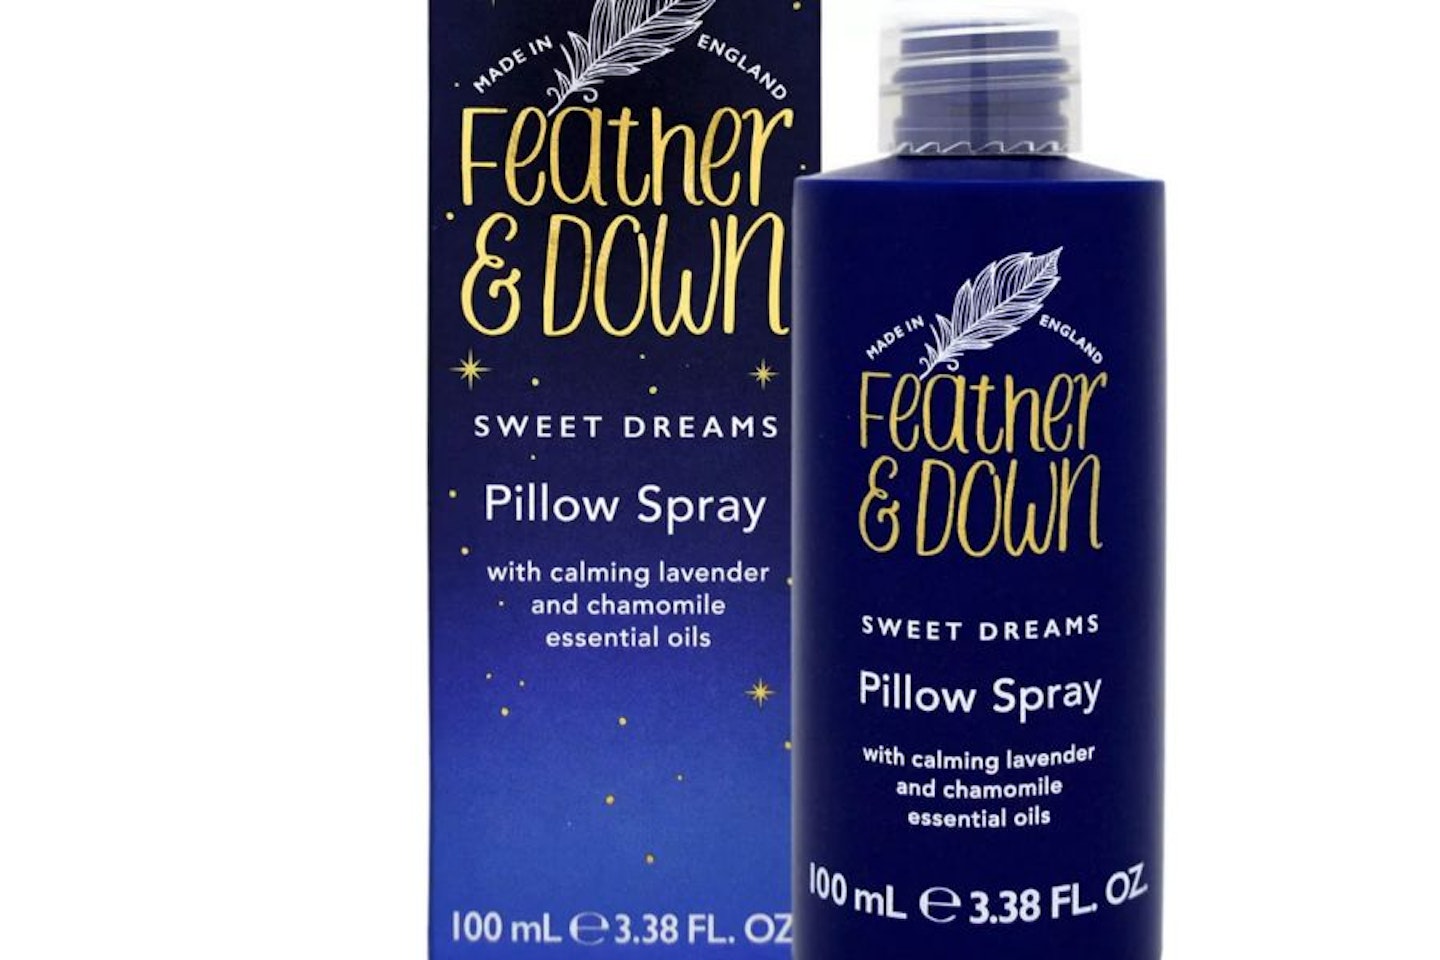 Boots Feather And Down Sweet Dreams Pillow Spray